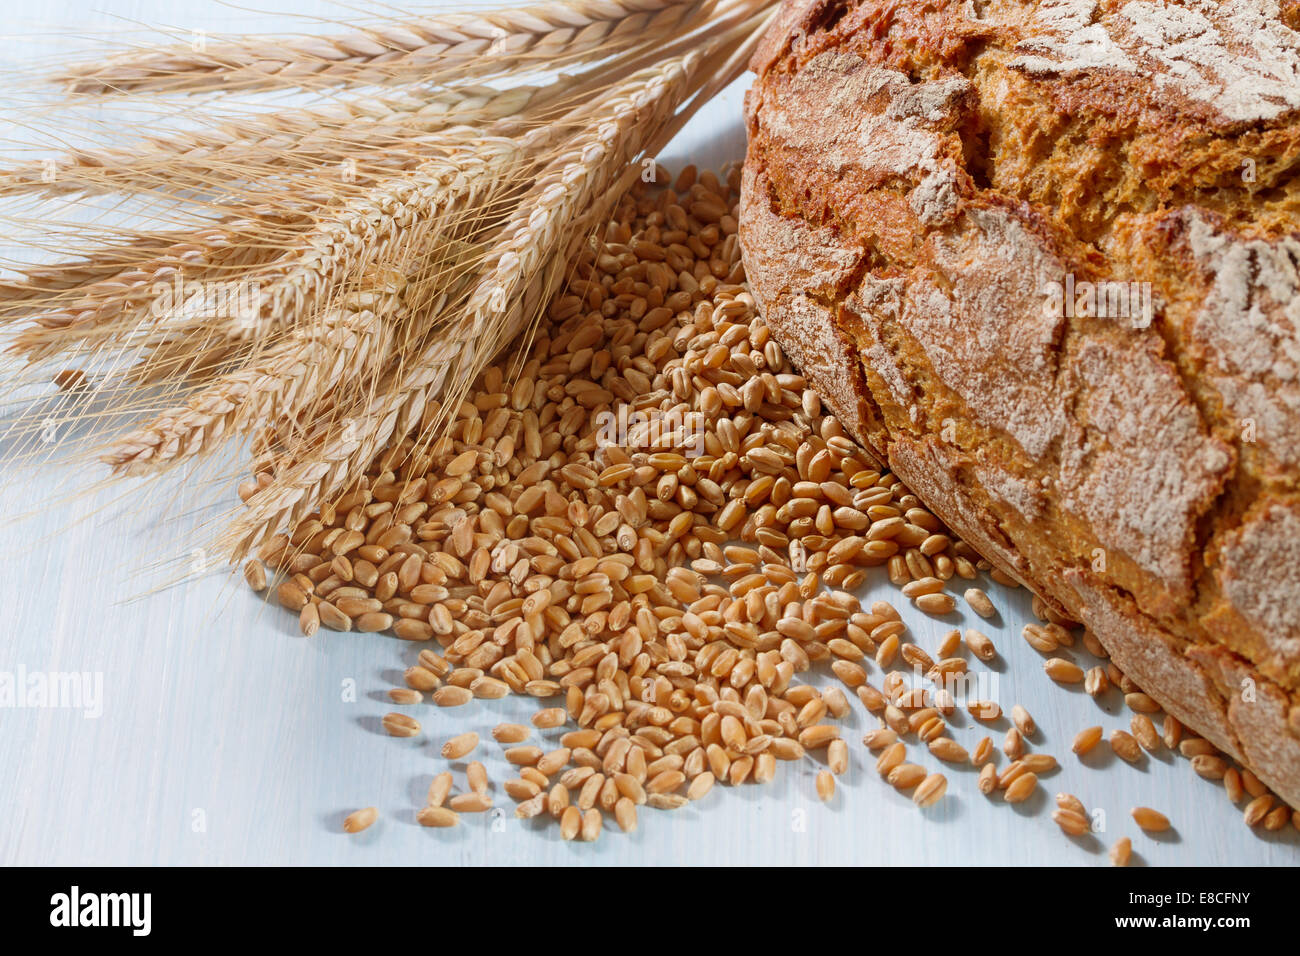 Fresh bread with wheat on the wooden background Stock Photo